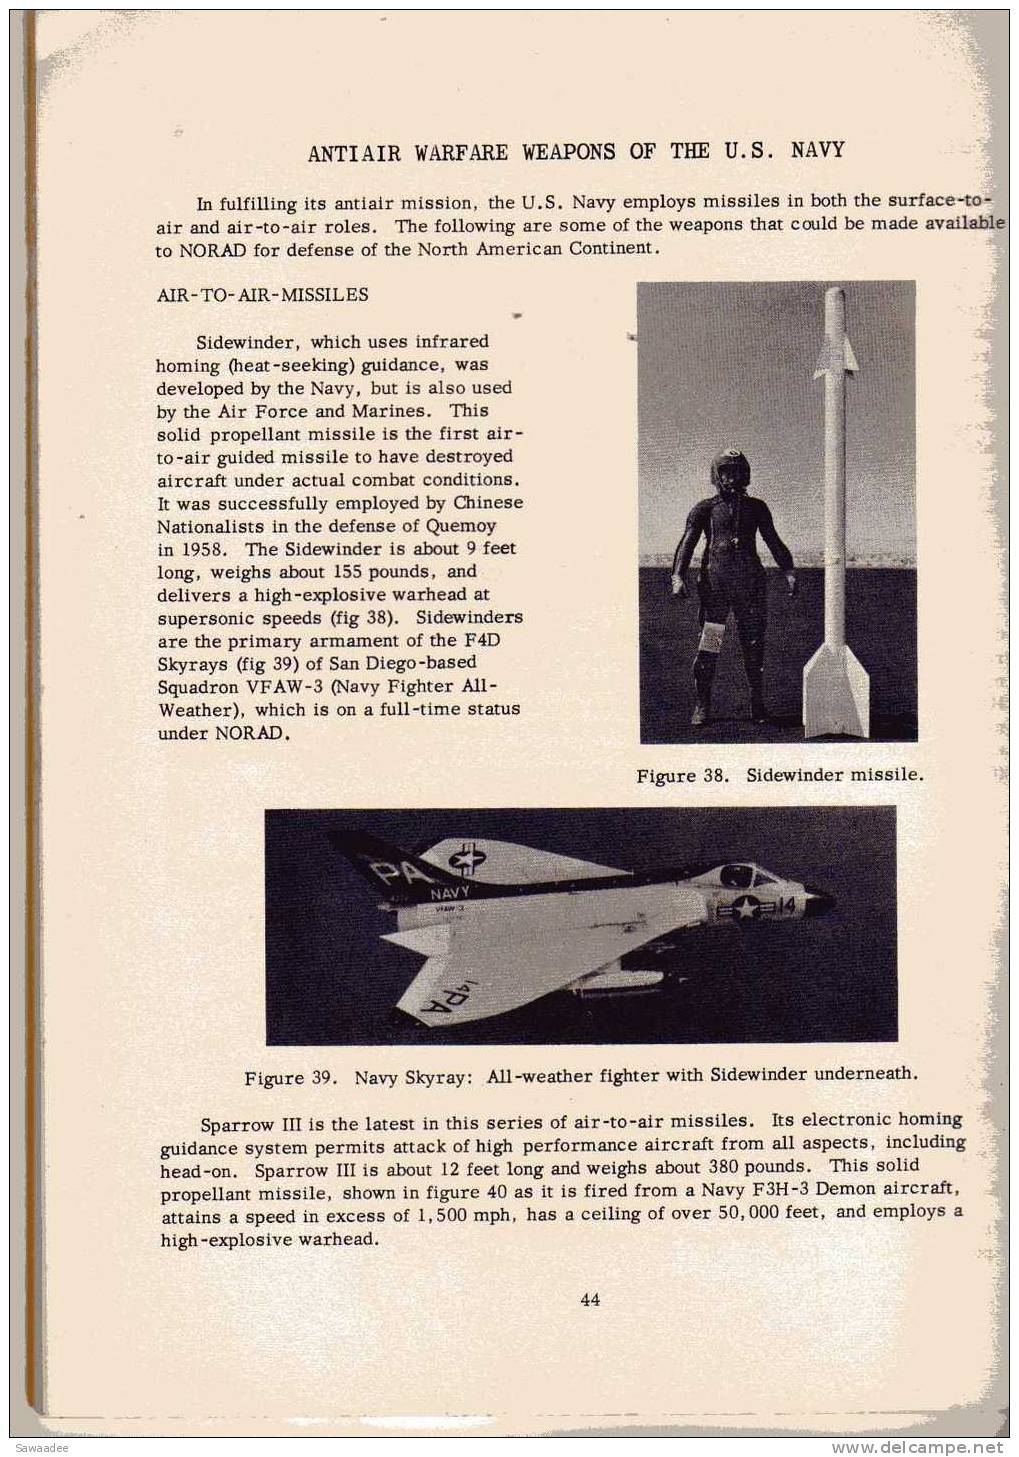 DOCUMENT - MILITARIA  - U.S. ARMY AIR DEFENSE -  FORT BLISS - TEXAS - 1962/63 - 78 PAGES - NBRES ILLUSTRATIONS, PHOTOS - Guerres Impliquant US